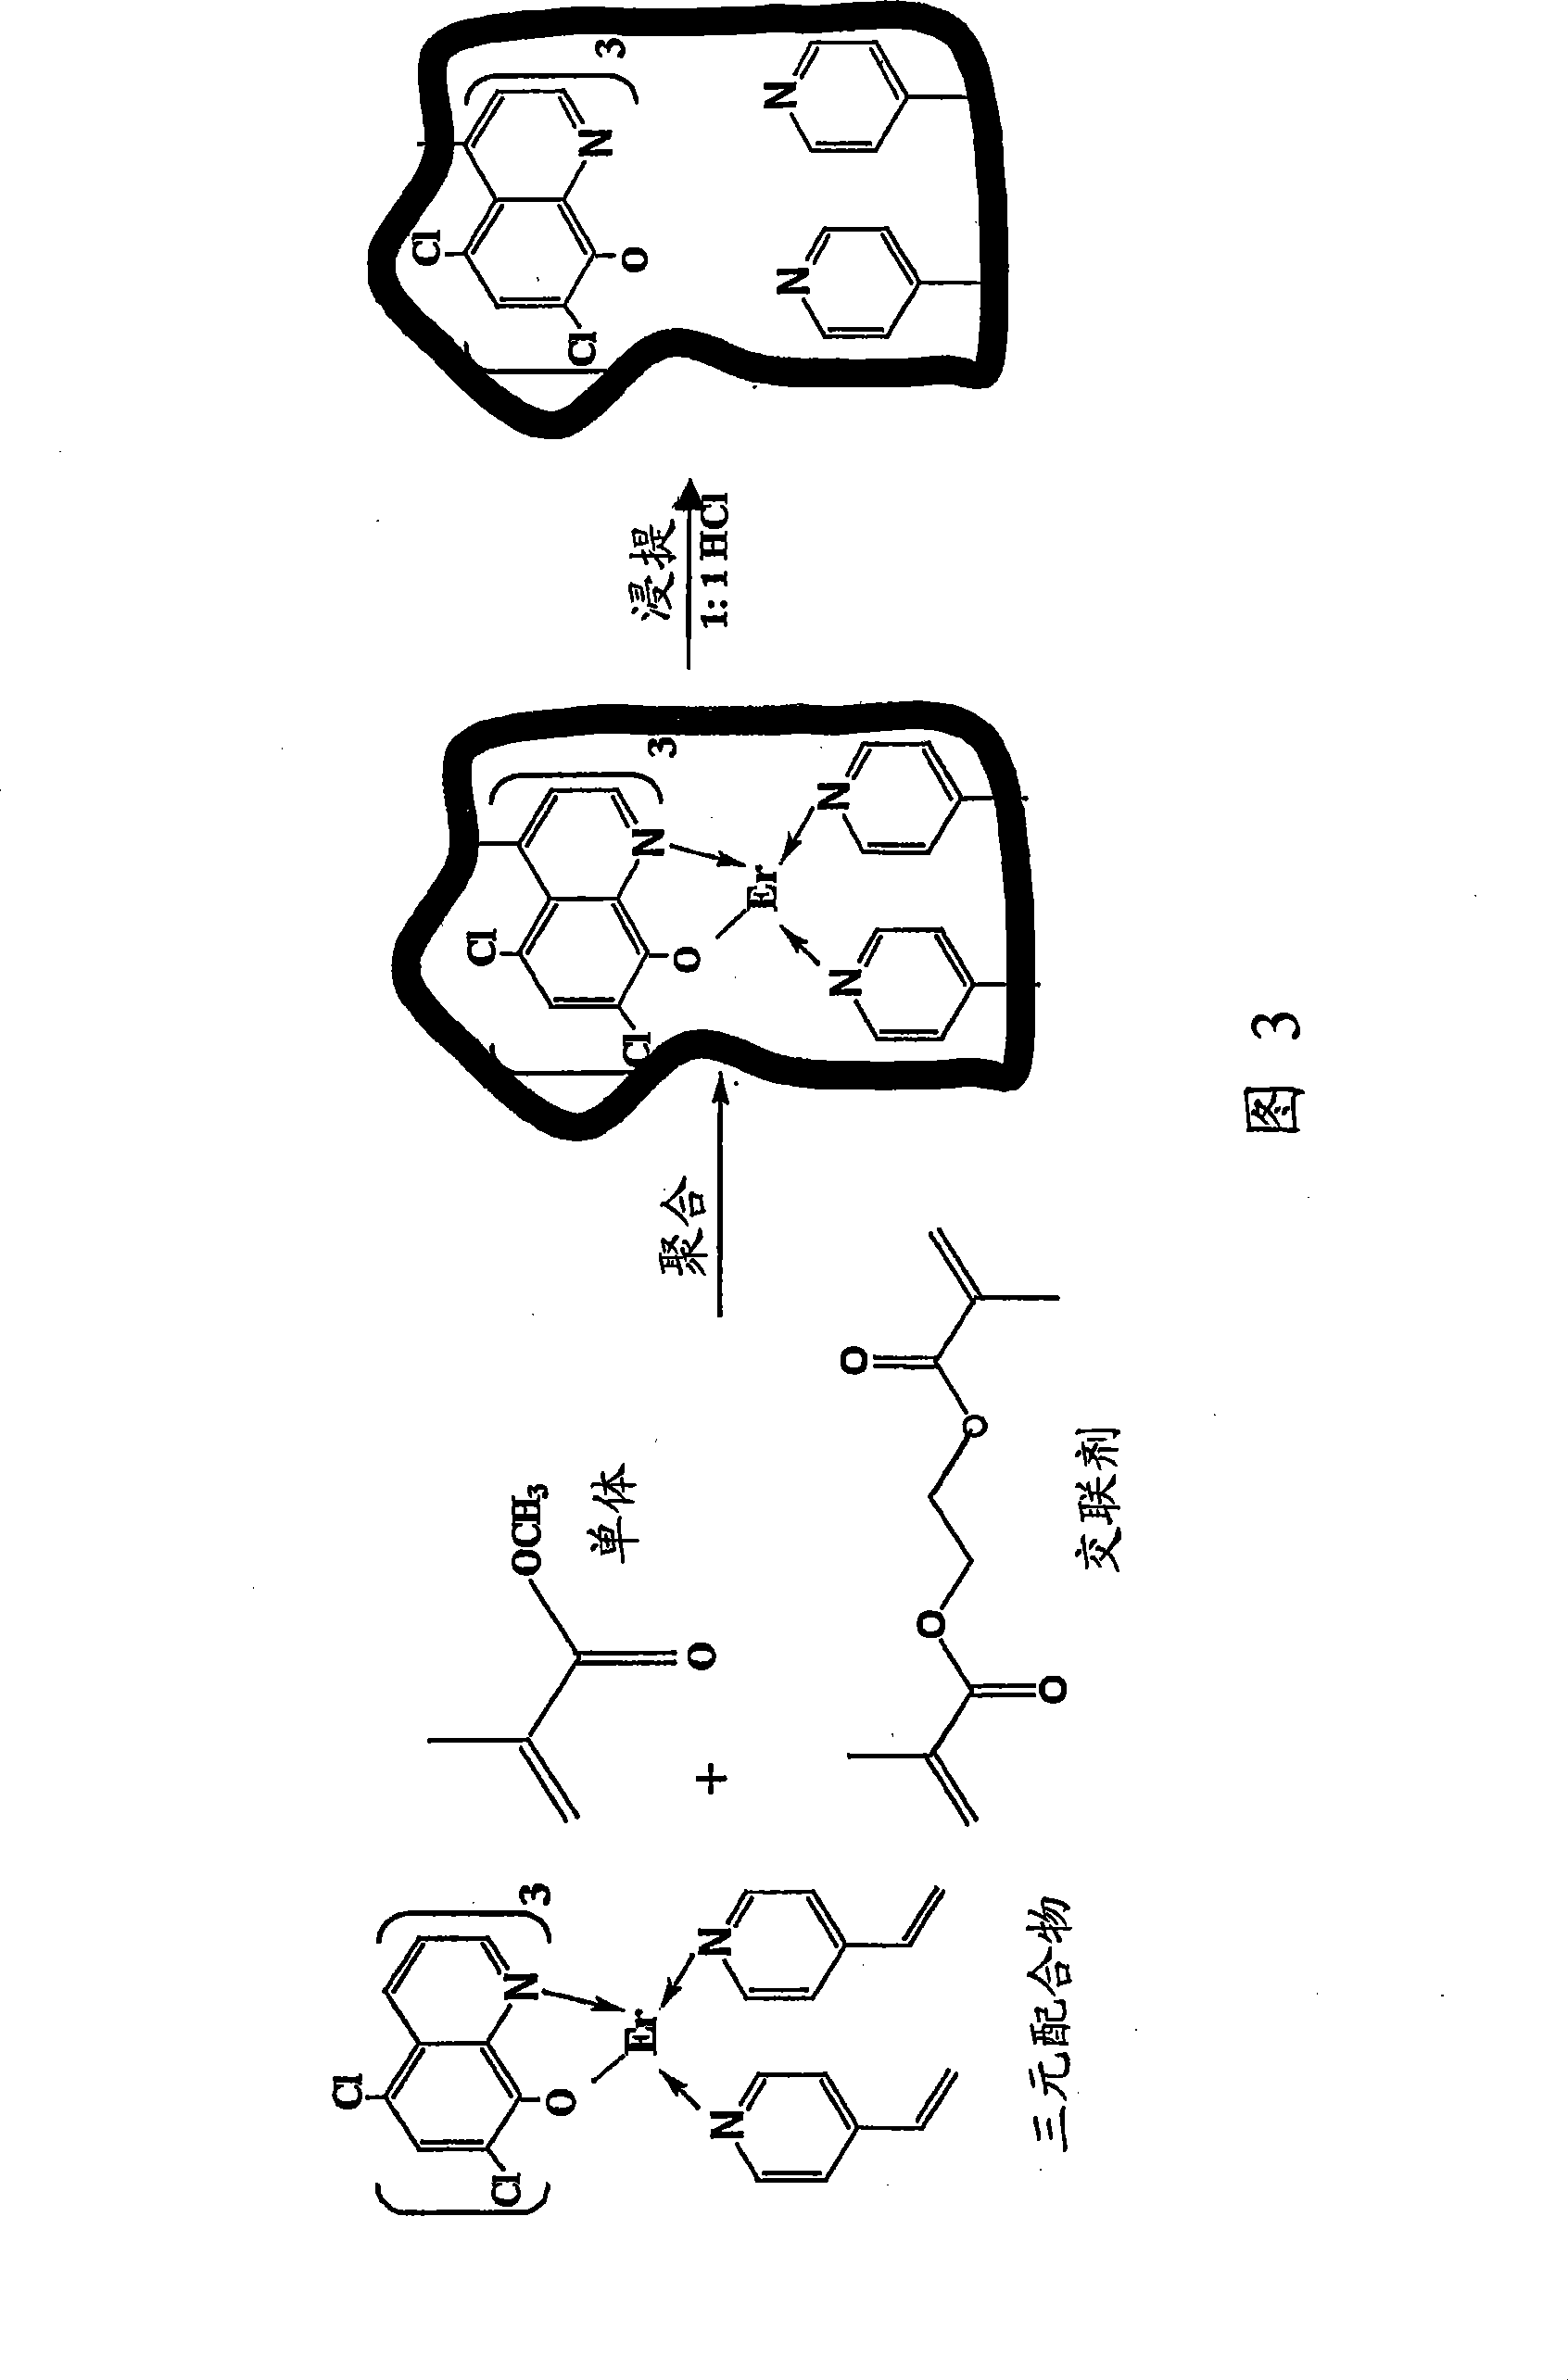 Synthesis of ion imprinted polymer particle